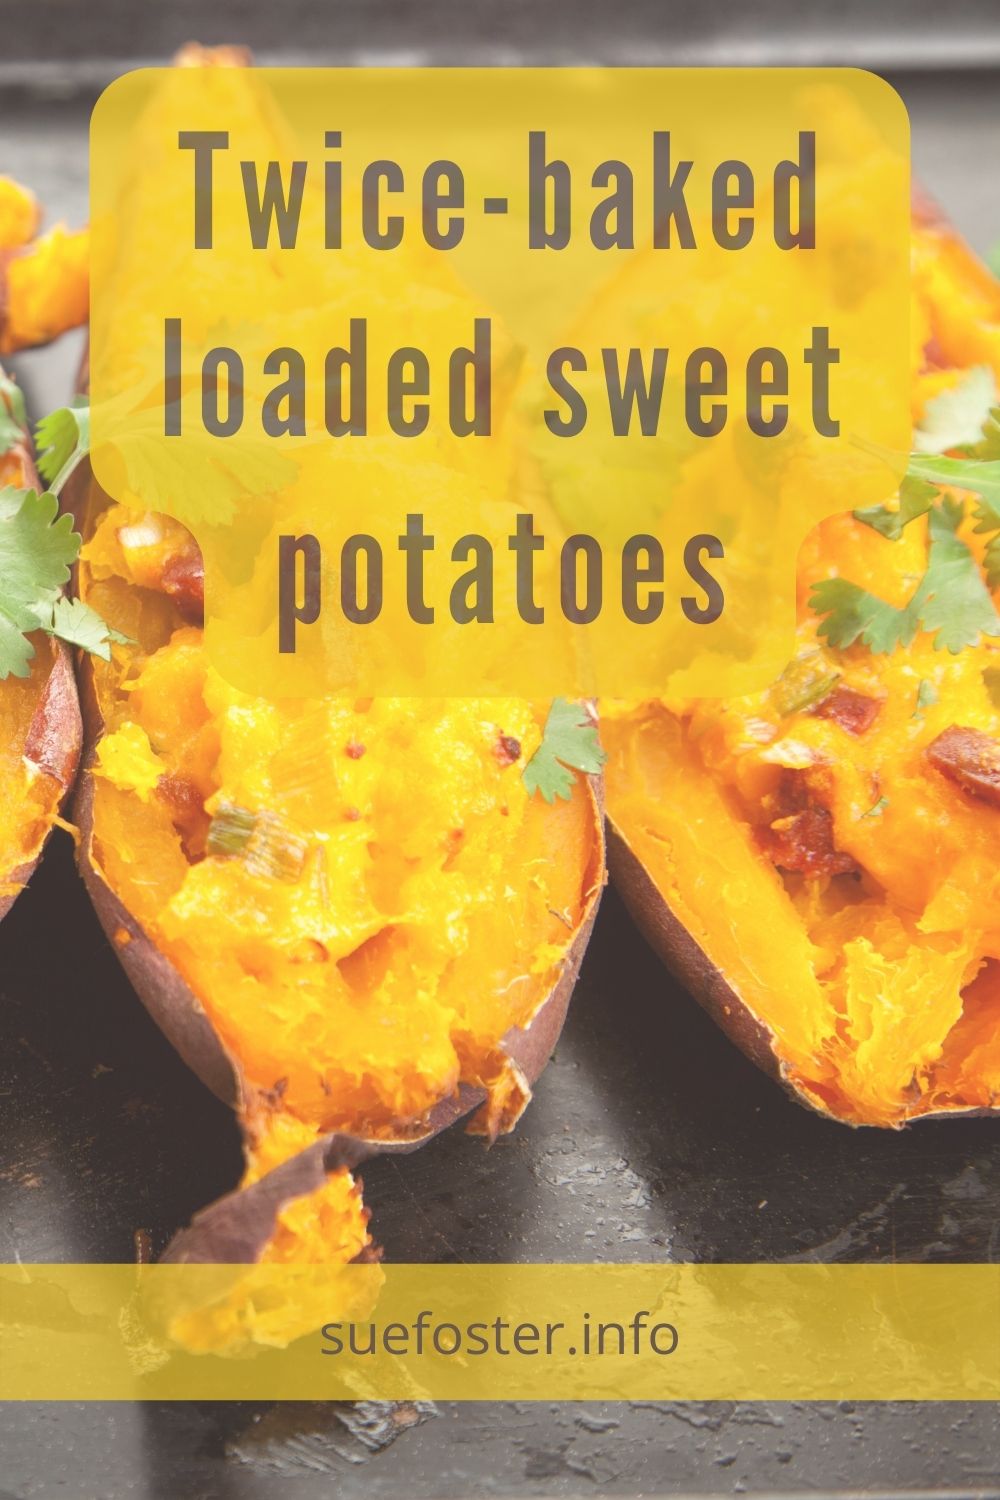 These twice-baked loaded sweet potatoes make an excellent accompaniment to any meal. They are easy to make, low-cost and with the cheese and bacon, no one would ever guess how many health benefits they contain. 